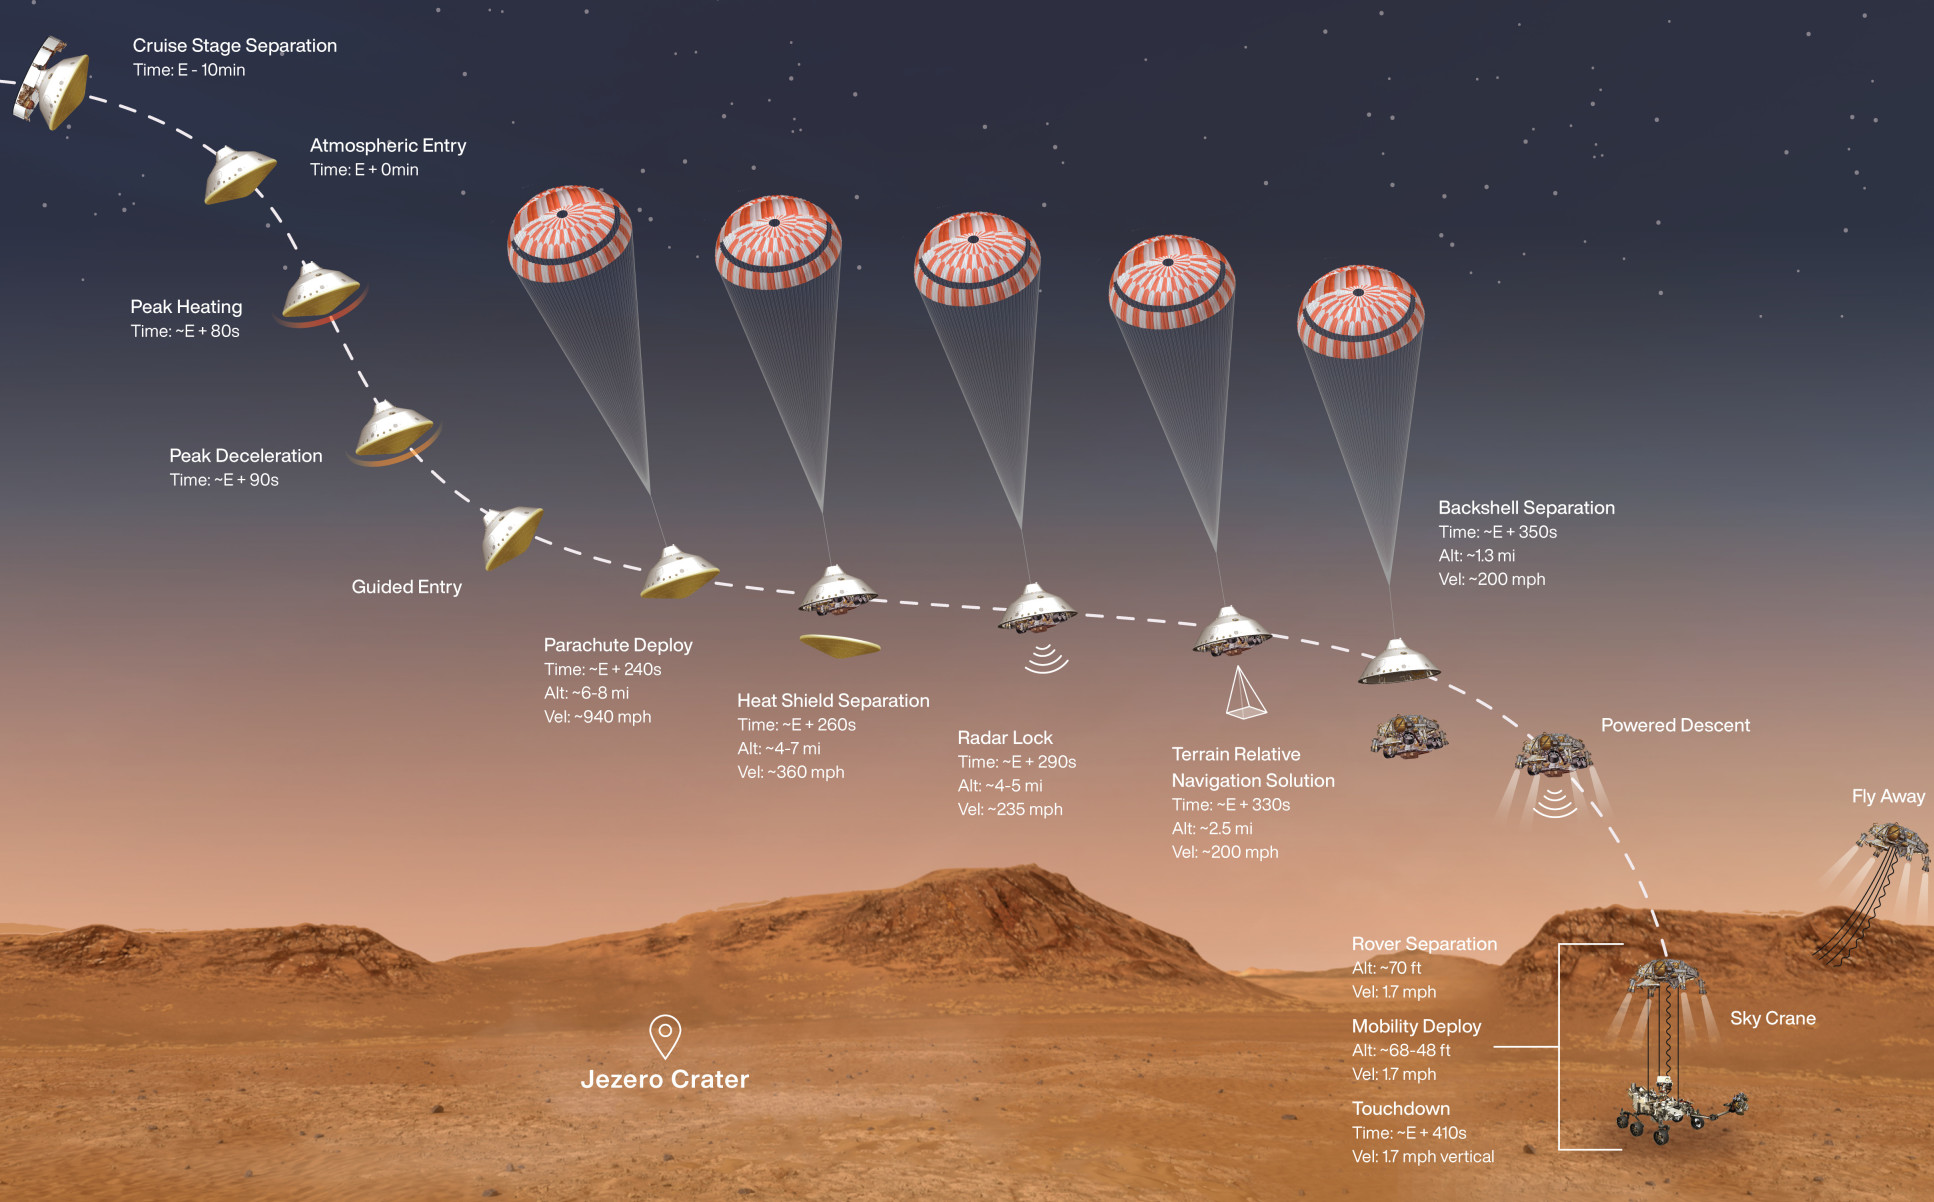 This illustration shows the events that occur in the final minutes of the nearly seven-month journey that NASA’s Perseverance rover takes to Mars. Entry, Descent, and Landing, or "EDL,” begins when the spacecraft reaches the top of the Martian atmosphere, travelling nearly 12,500 mph (20,000 kph). It ends about seven minutes later, with Perseverance stationary on the Martian surface. Perseverance handles everything on its own during this process. It takes more than 11 minutes to get a radio signal back from Mars, so by the time the mission team hears that the spacecraft has entered the atmosphere, in reality, the rover is already on the ground.